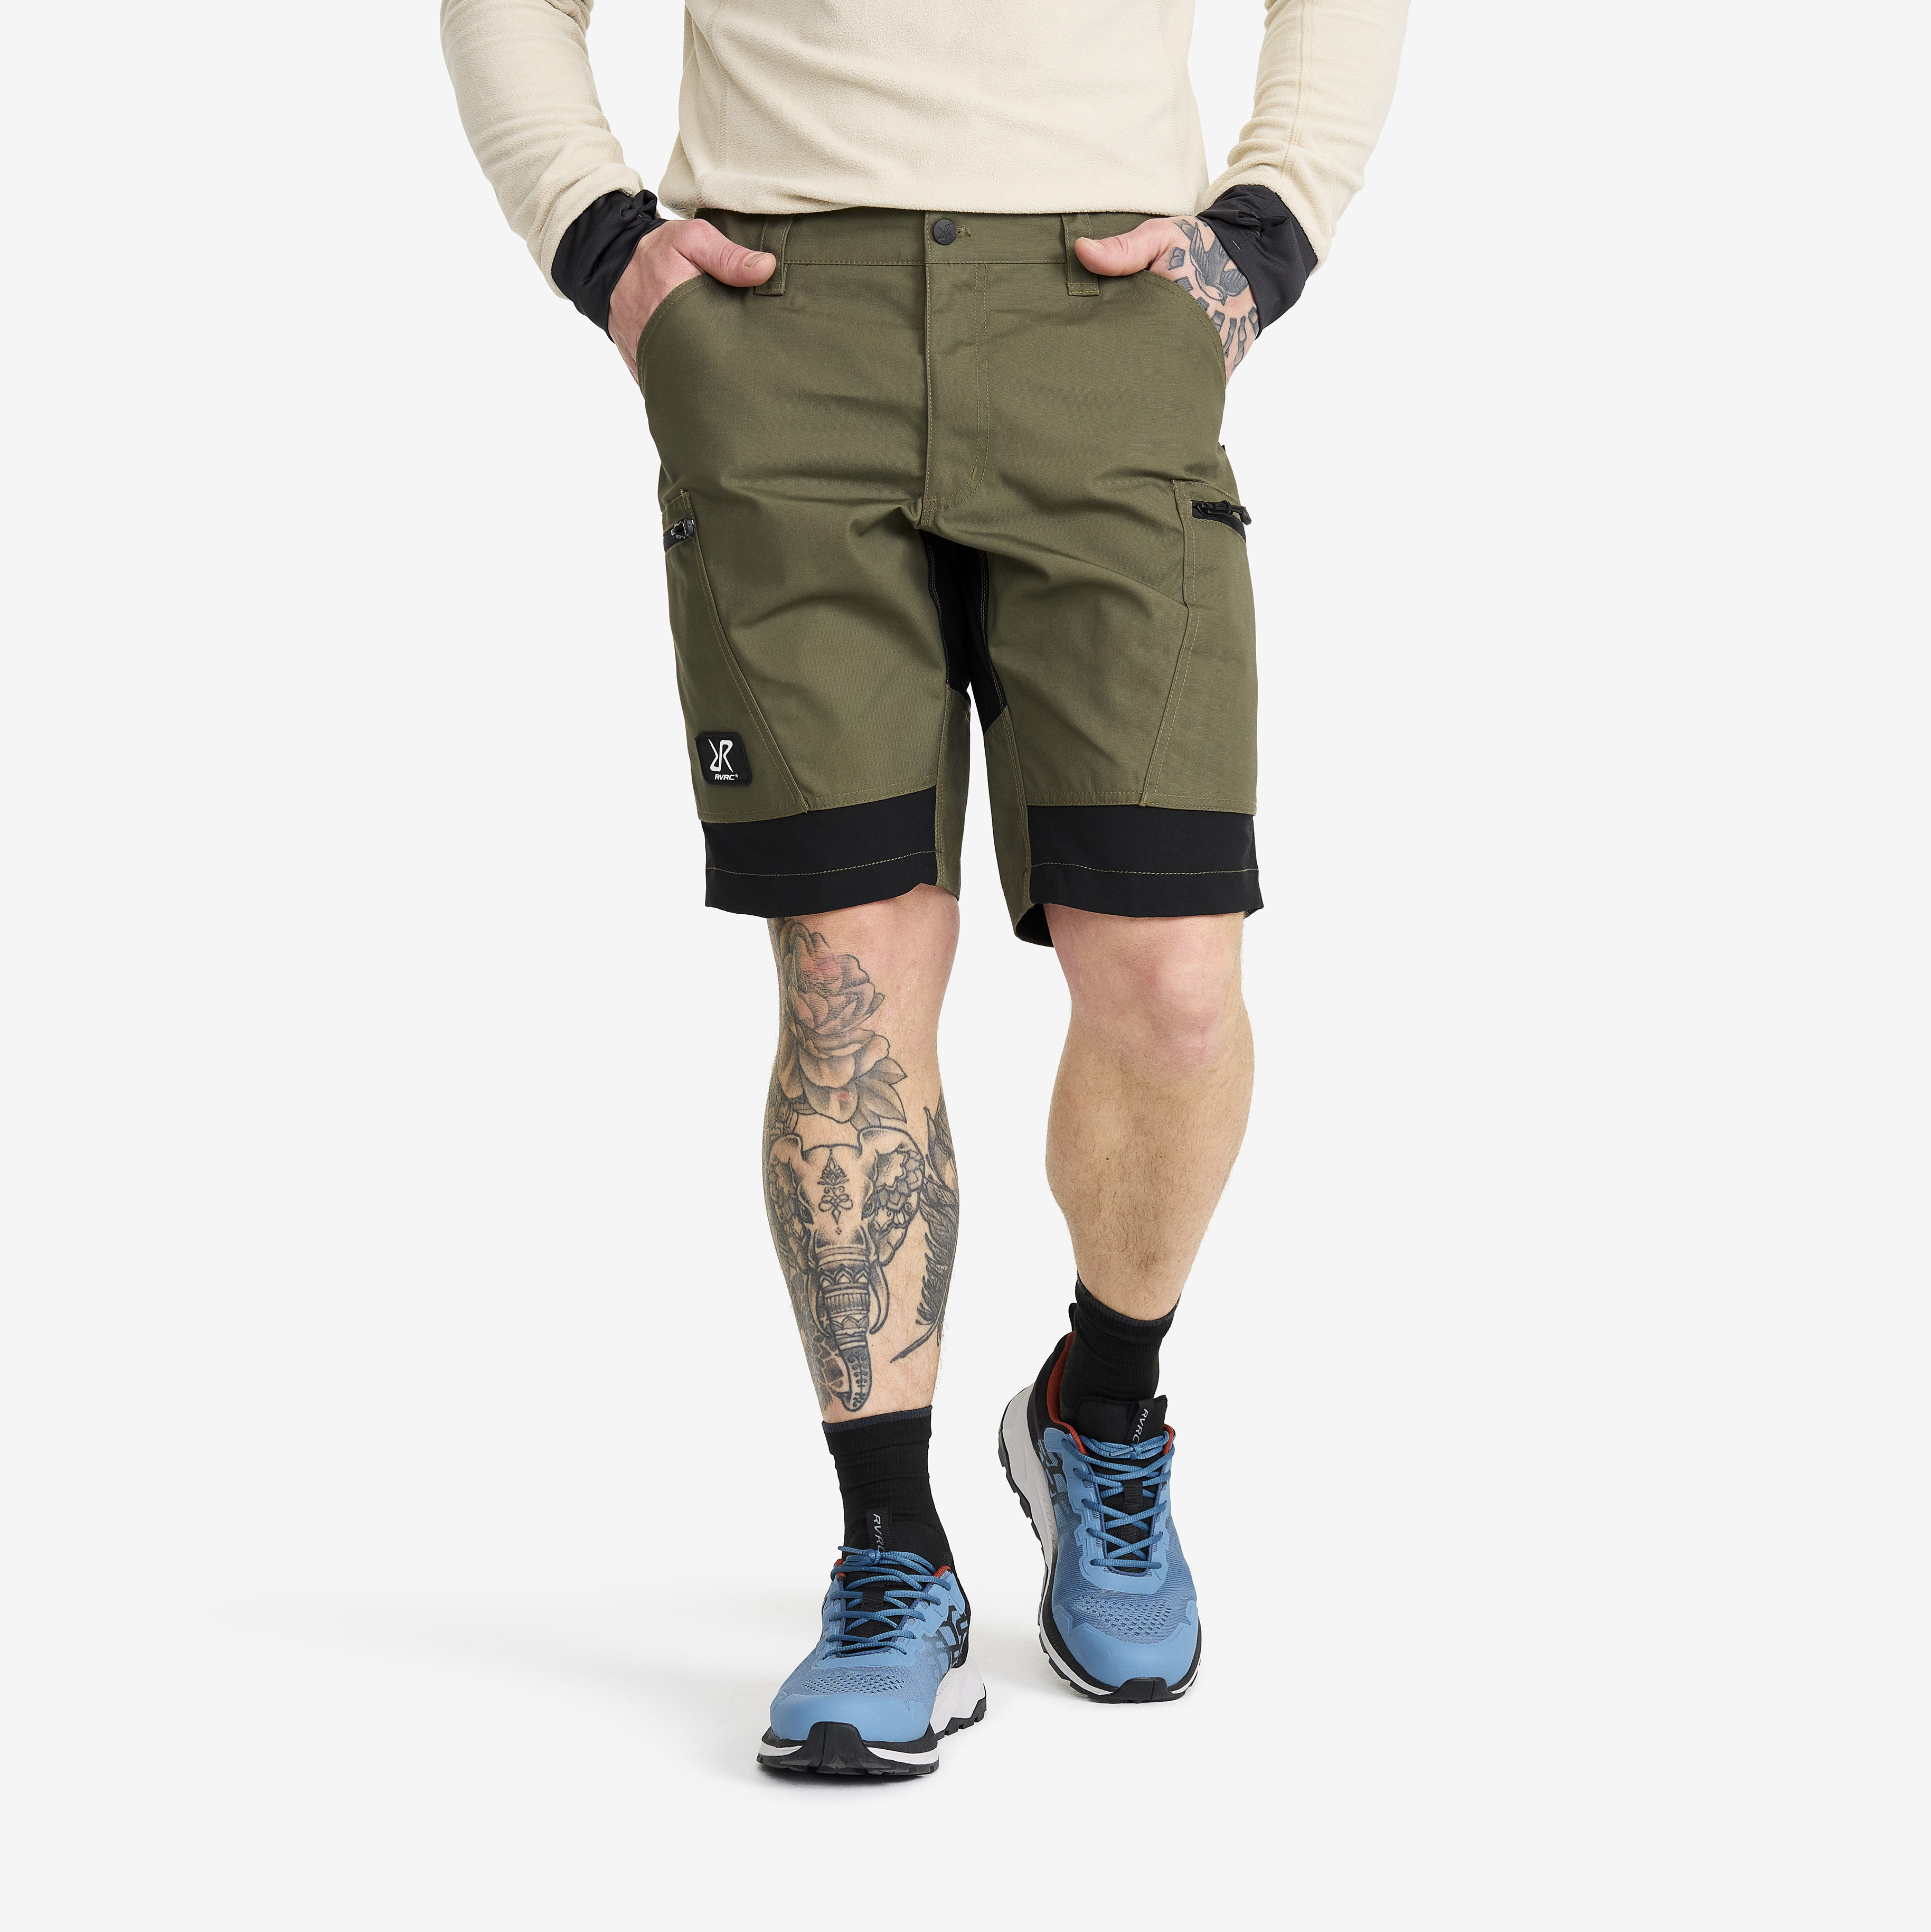 Nordwand Shorts Olive Night Homme